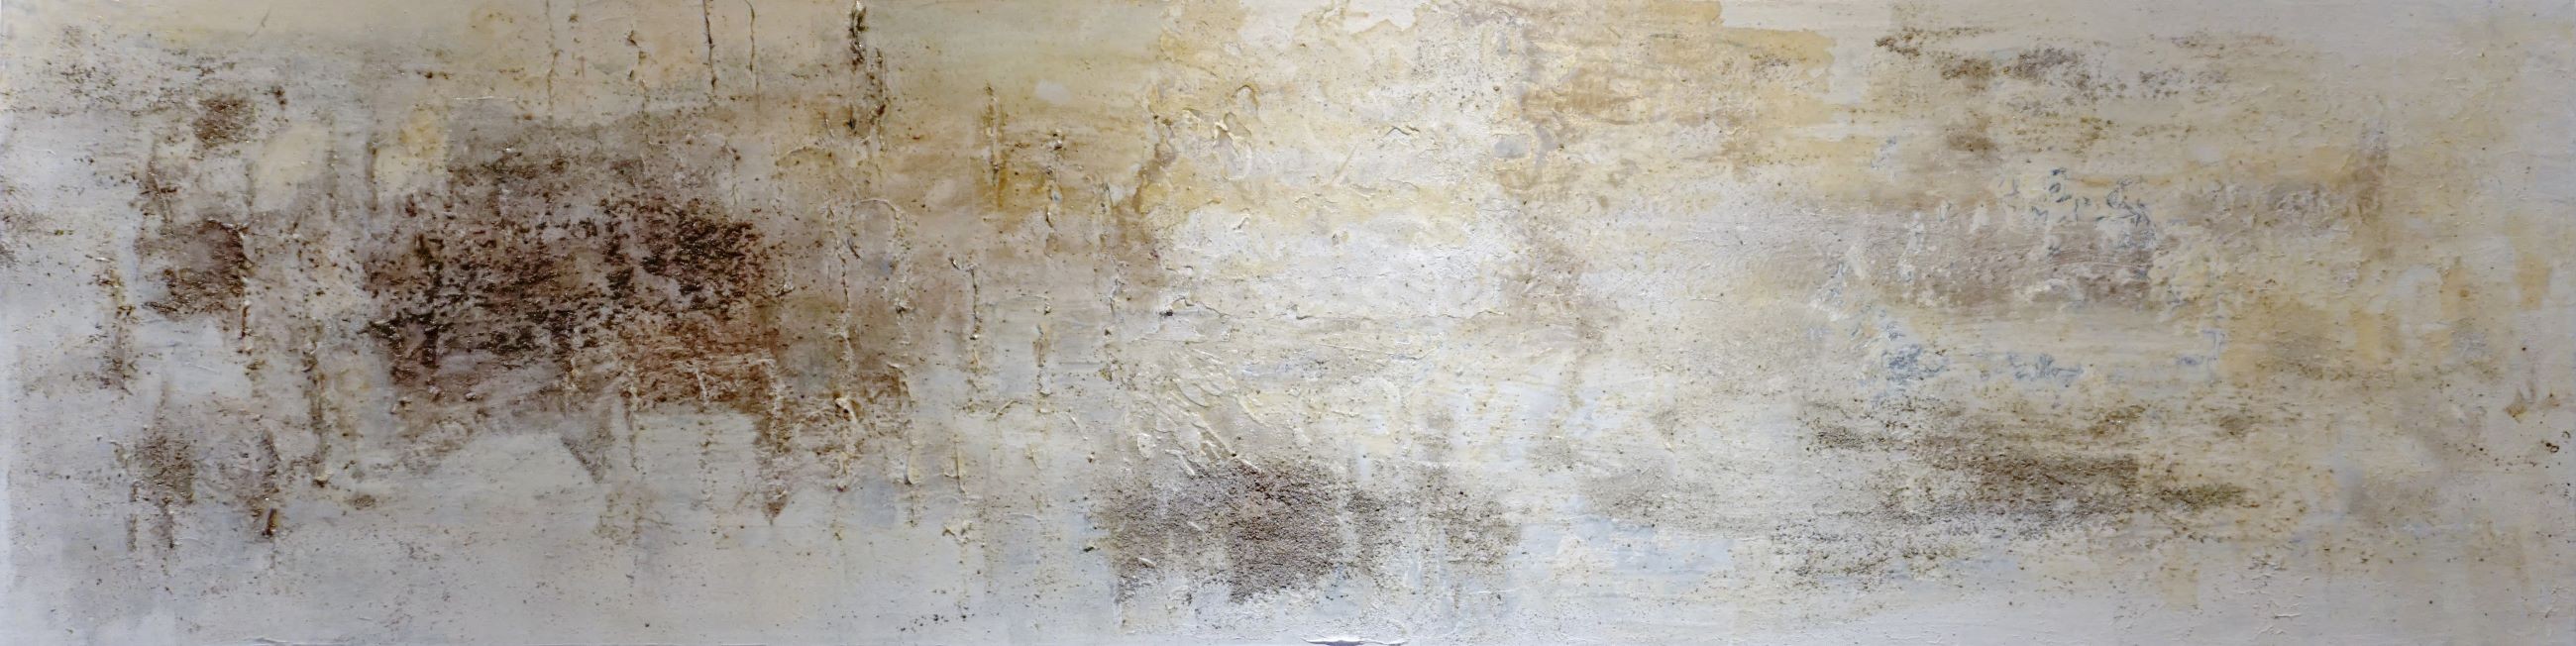 Abstract Art. Title: Crema, Mixed Media, 18x72 inches by Contemporary Canadian Artist G Kim Hinkson.